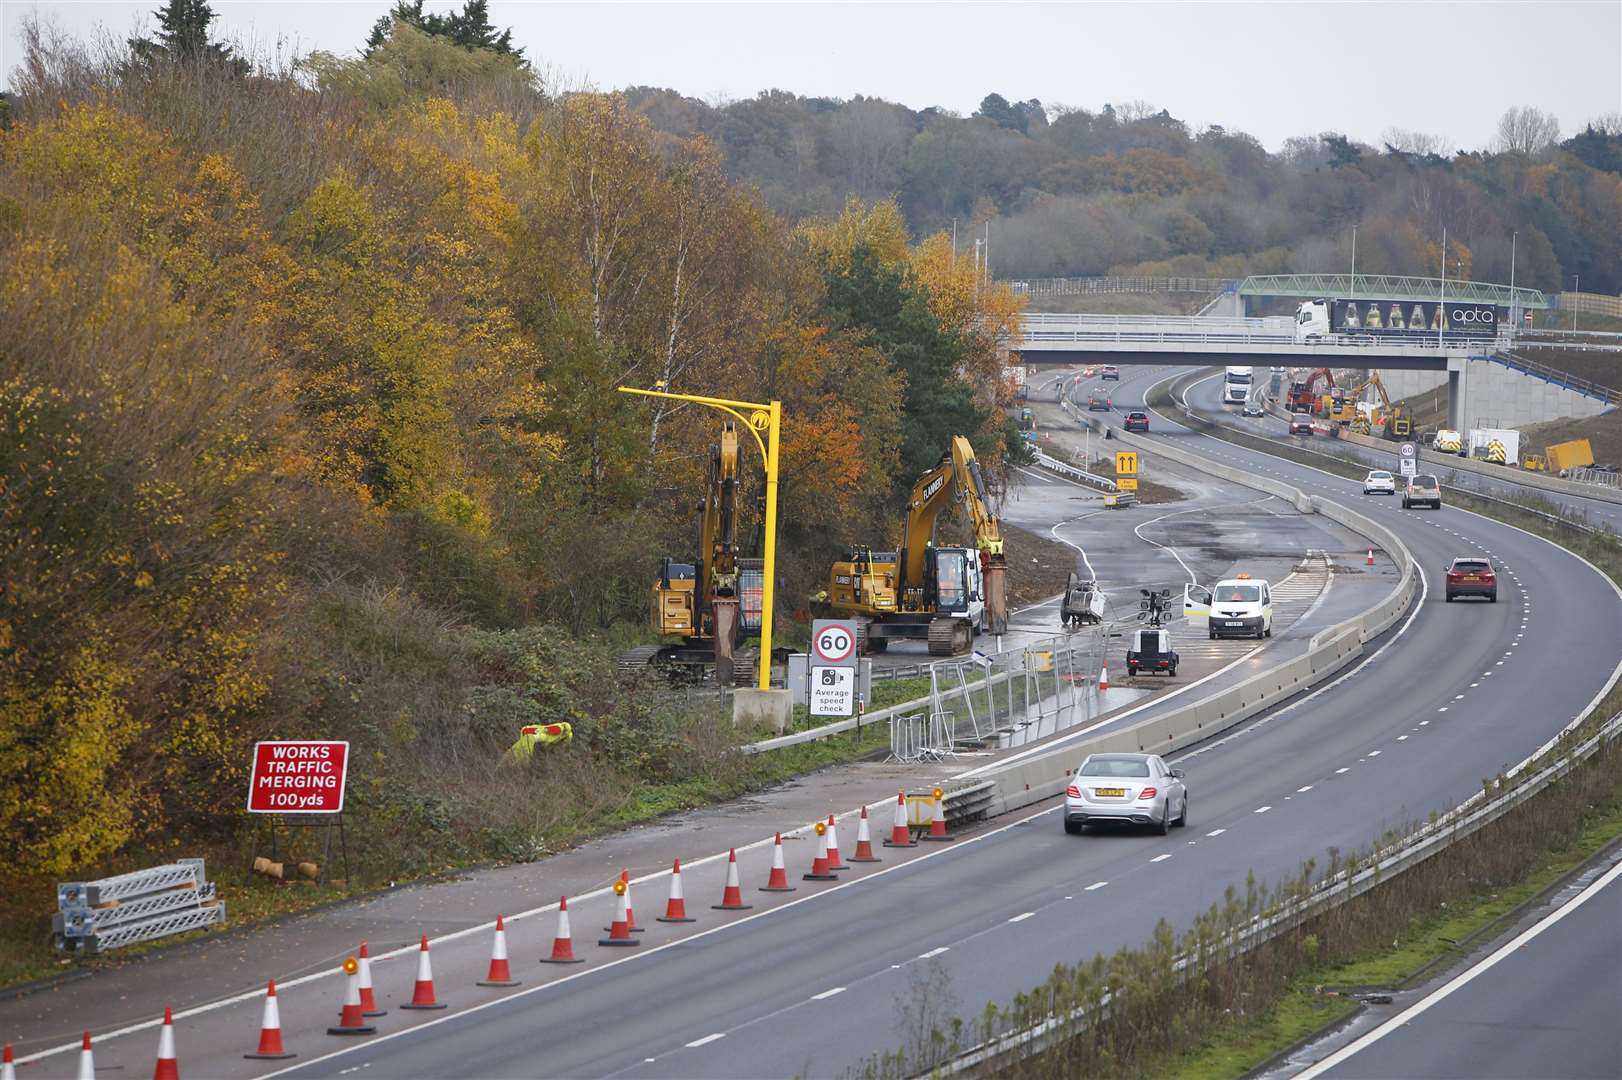 An eventual end to the works on the M20 will come